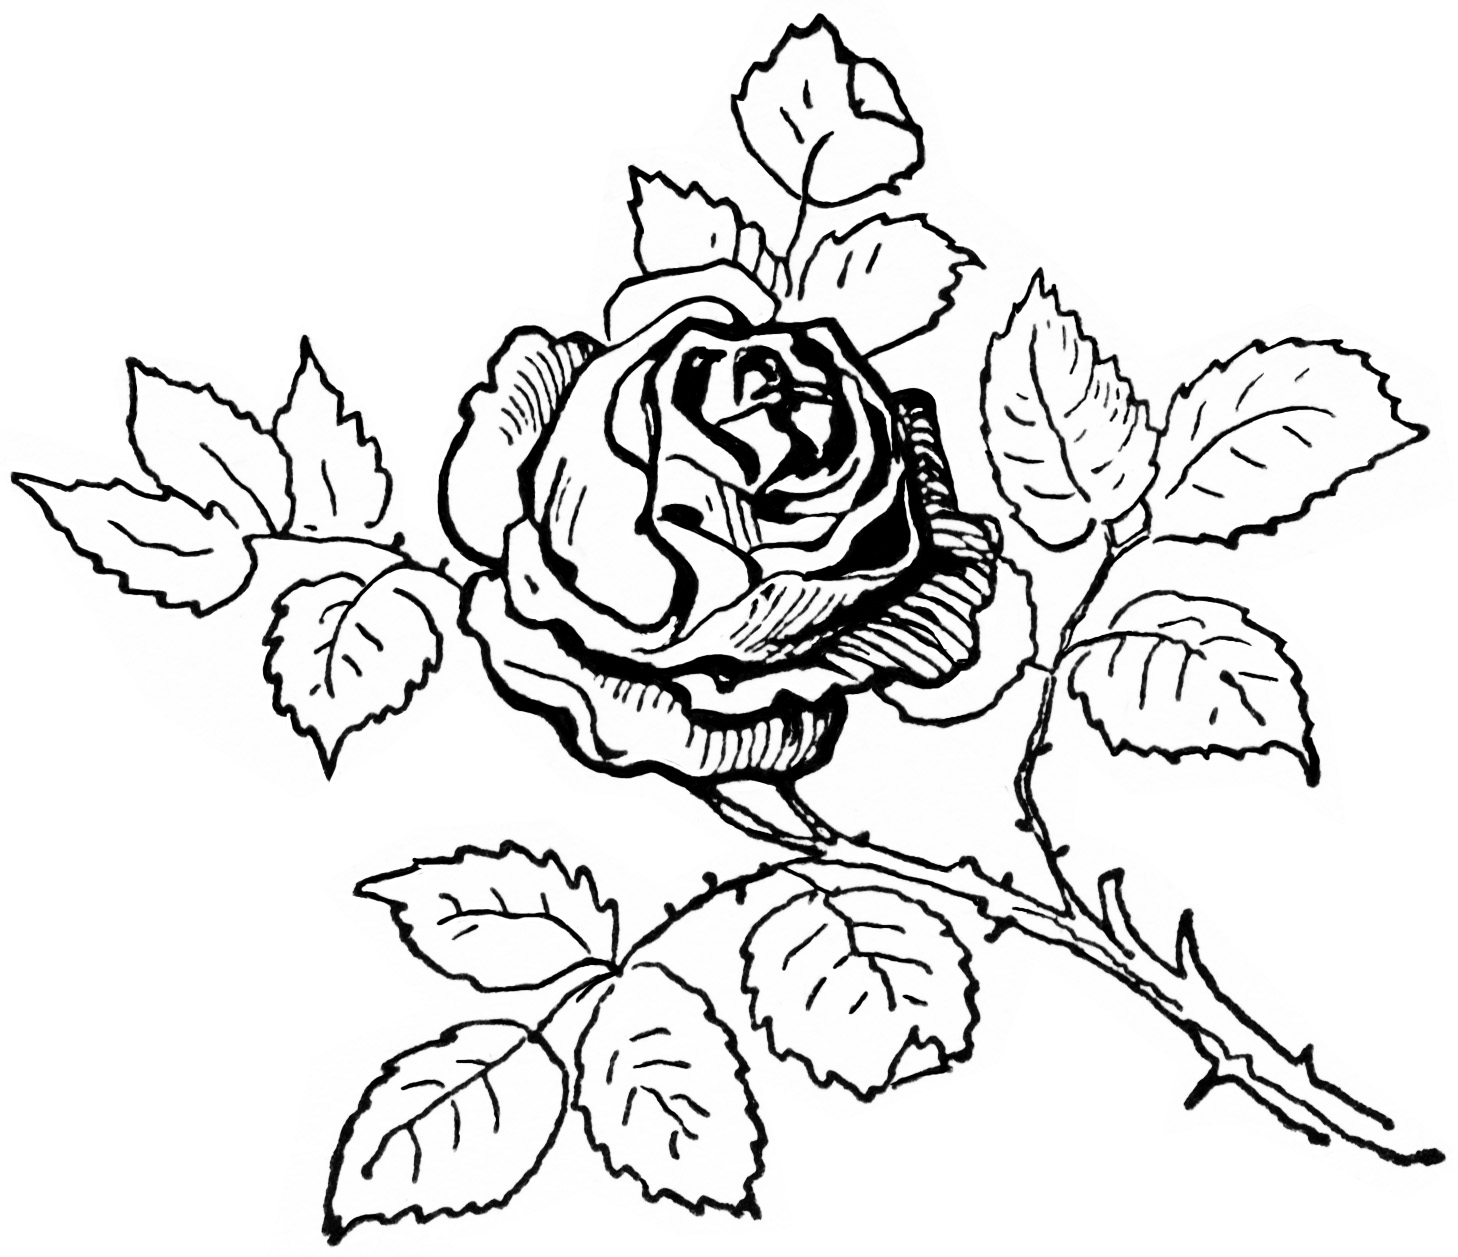 rose clipart